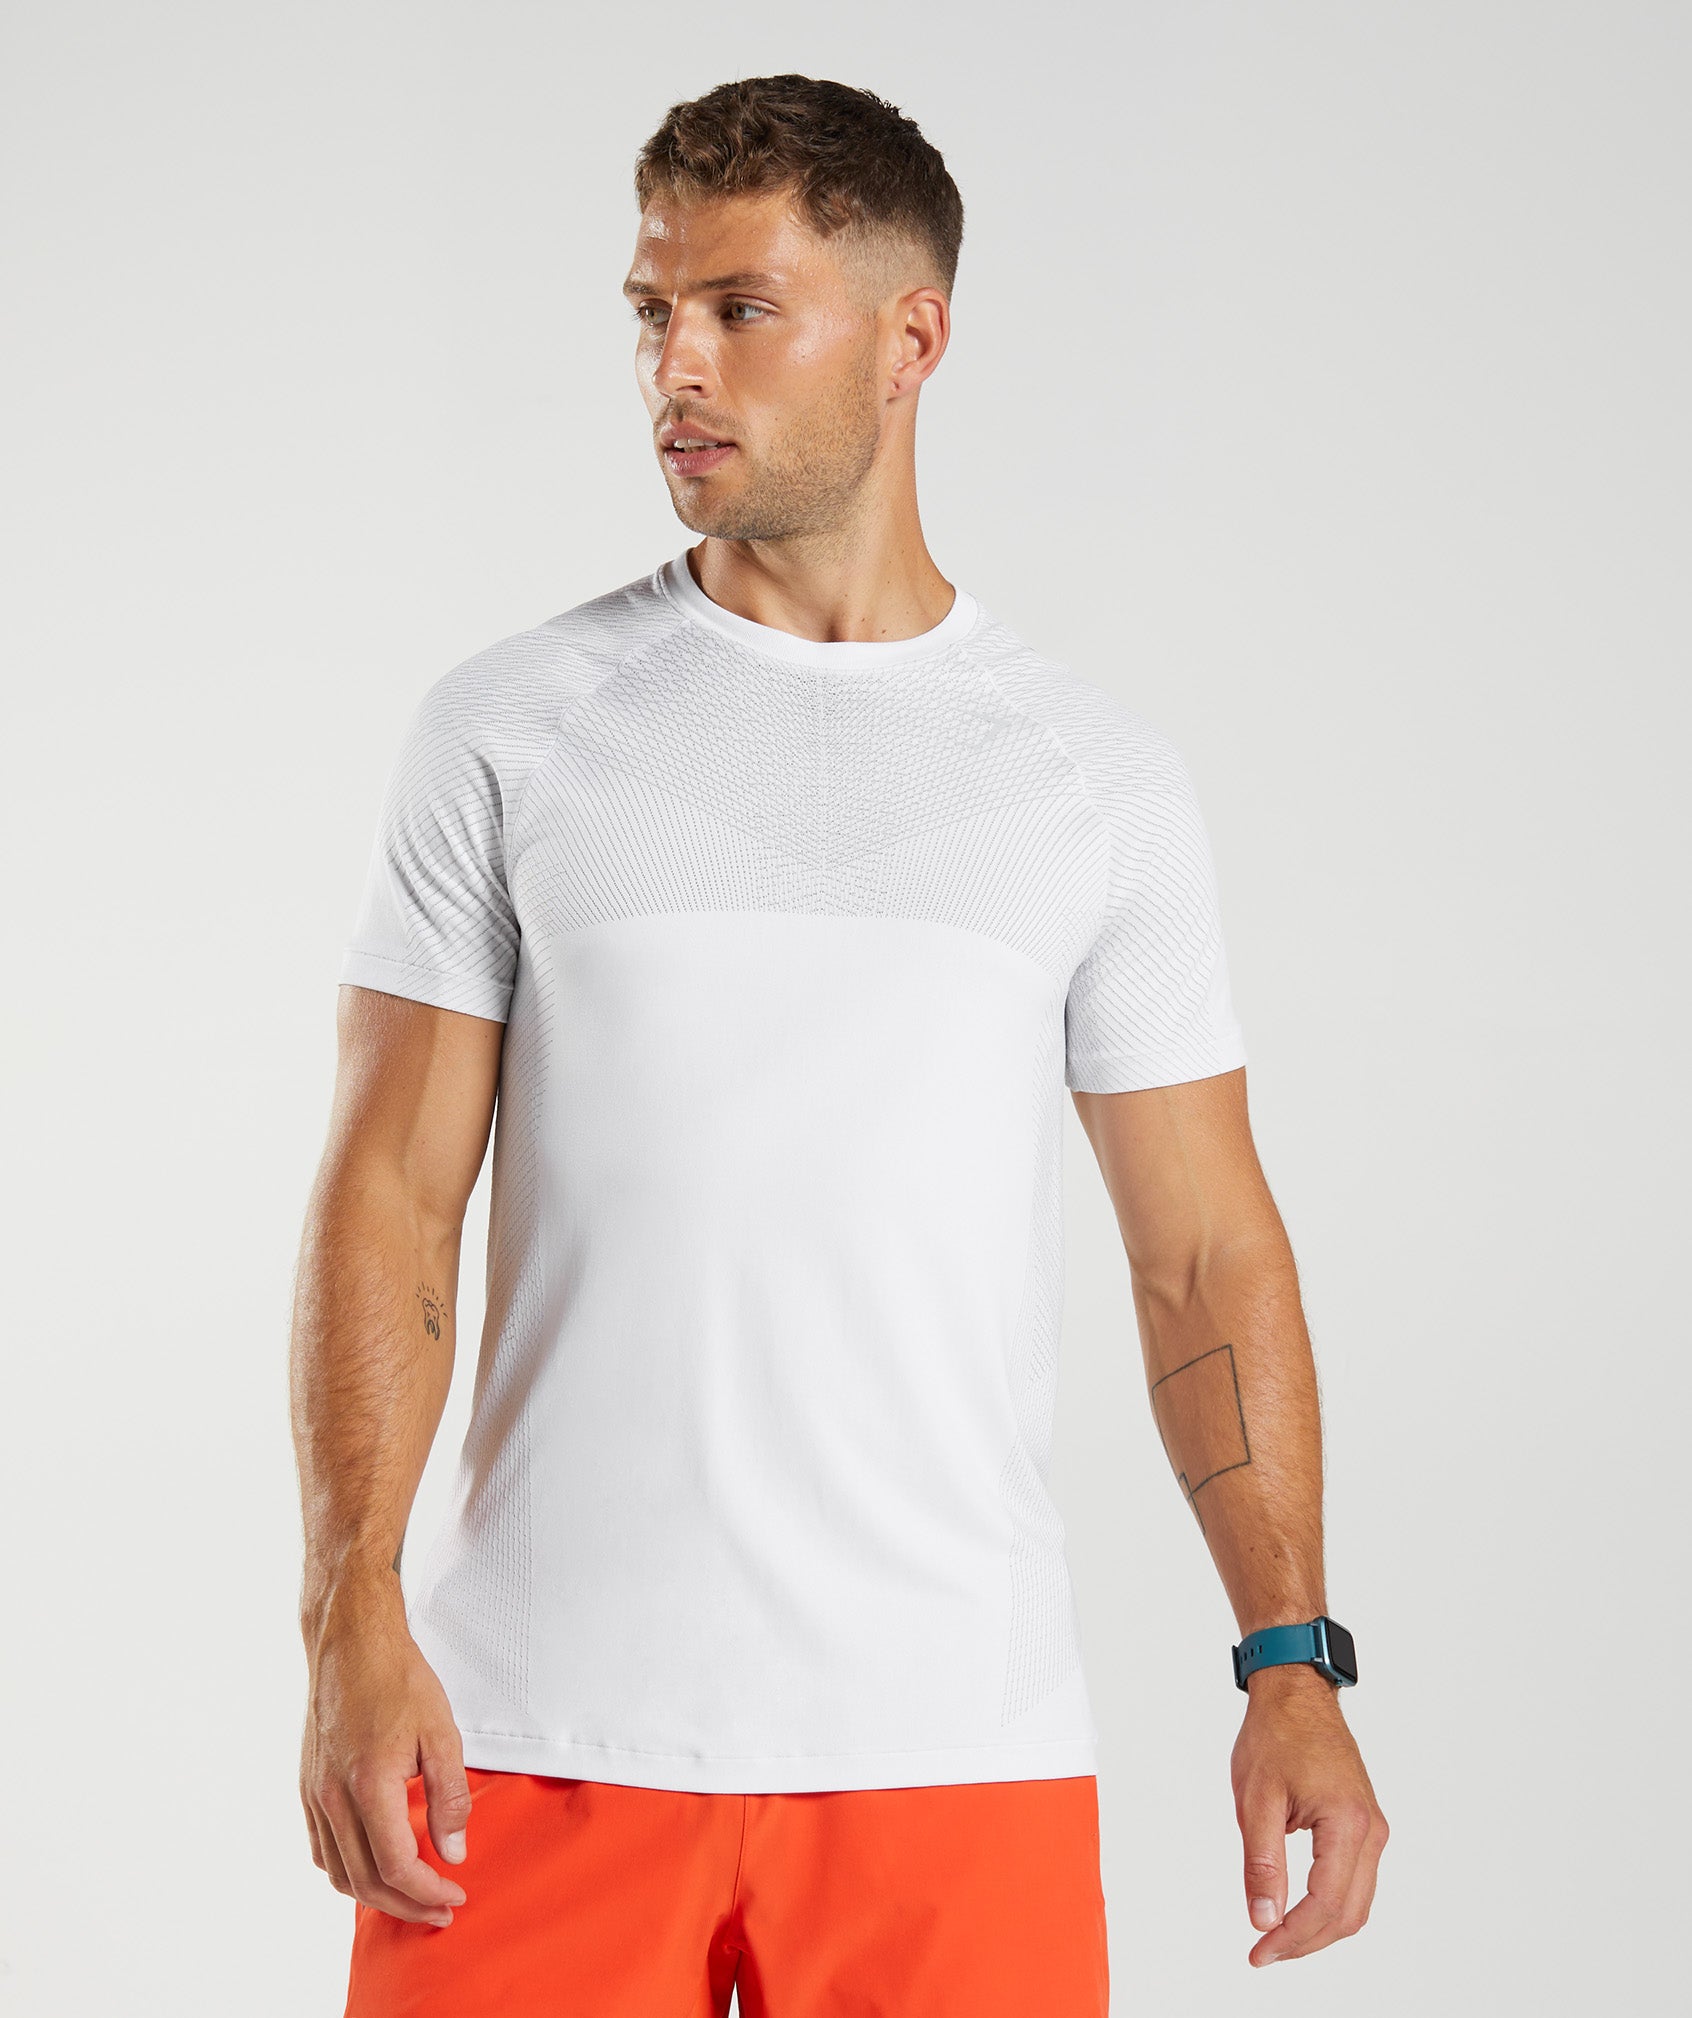 Apex Seamless T-Shirt in White/Light Grey - view 1